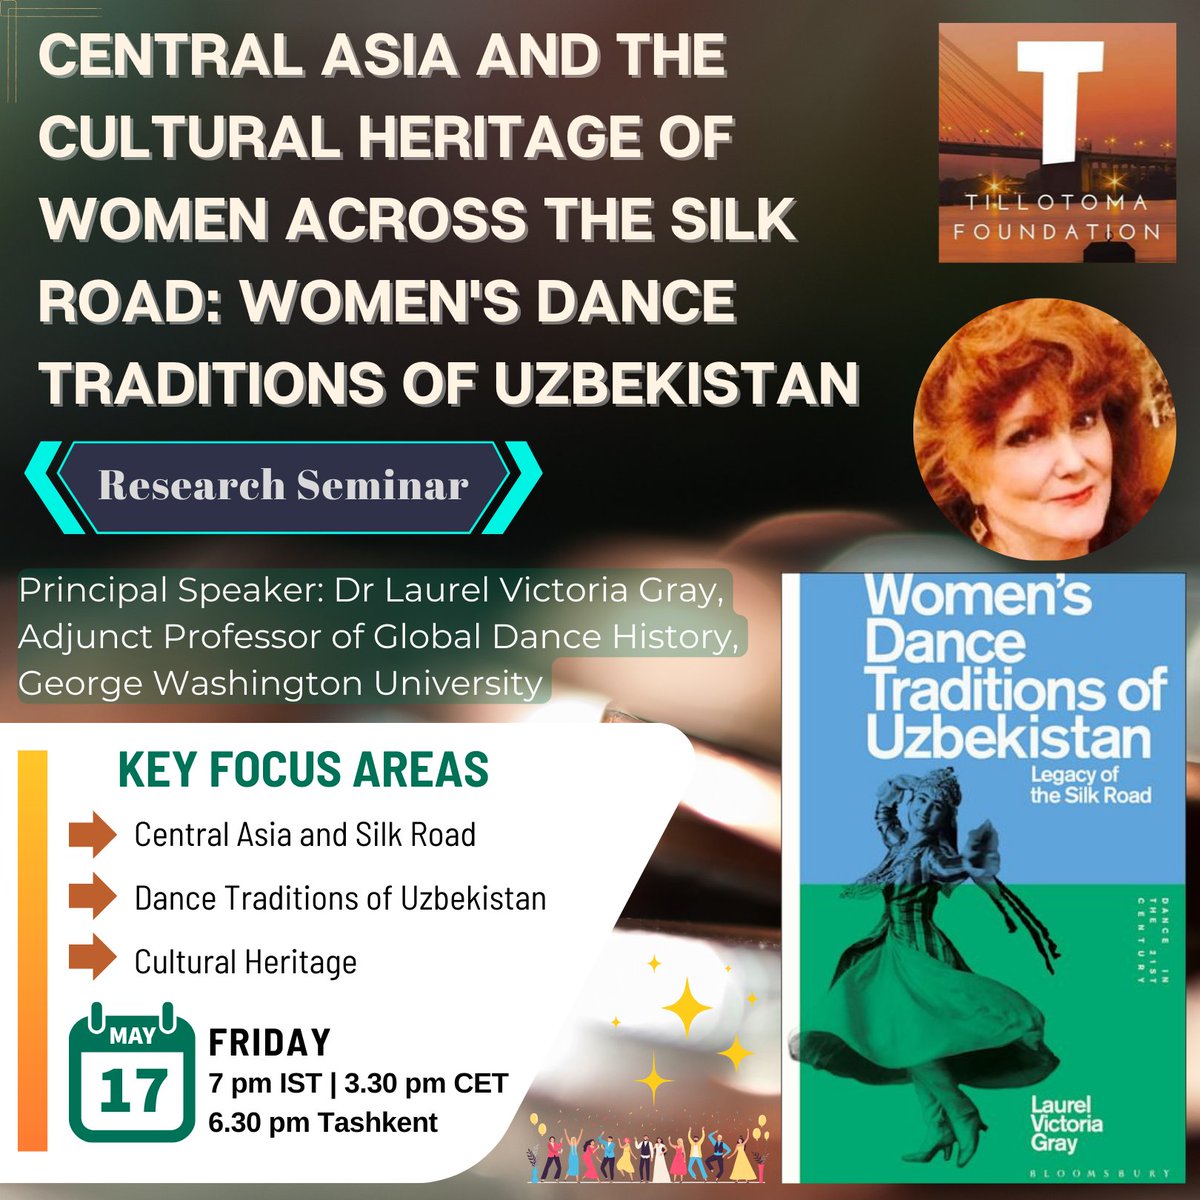 A Research Seminar on 'Central Asia and the Cultural Heritage of Women Across the Silk Road: Women's Dance Traditions of Uzbekistan', is being organized by the Tillotoma Foundation, on 17th May, 2024. To join, email at tillotomafoundation@gmail.com.